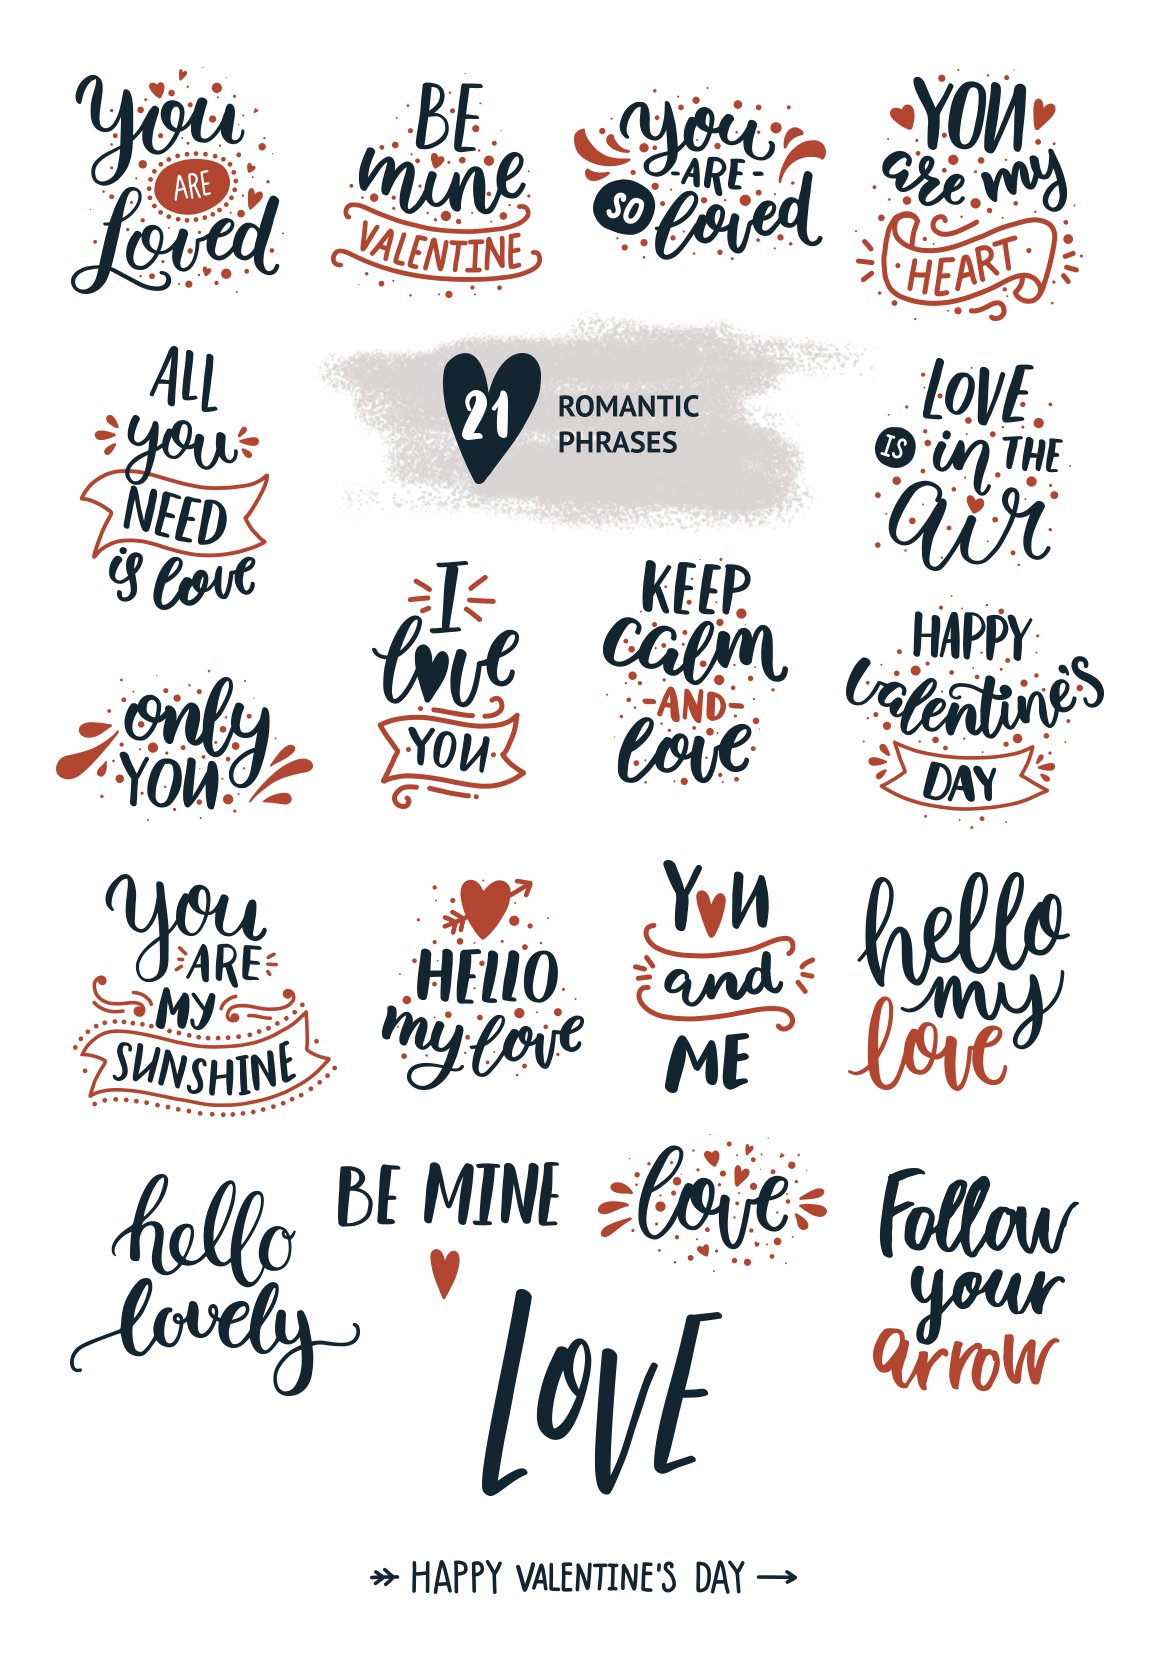 21 different romantic phrases in black and red on a white background.